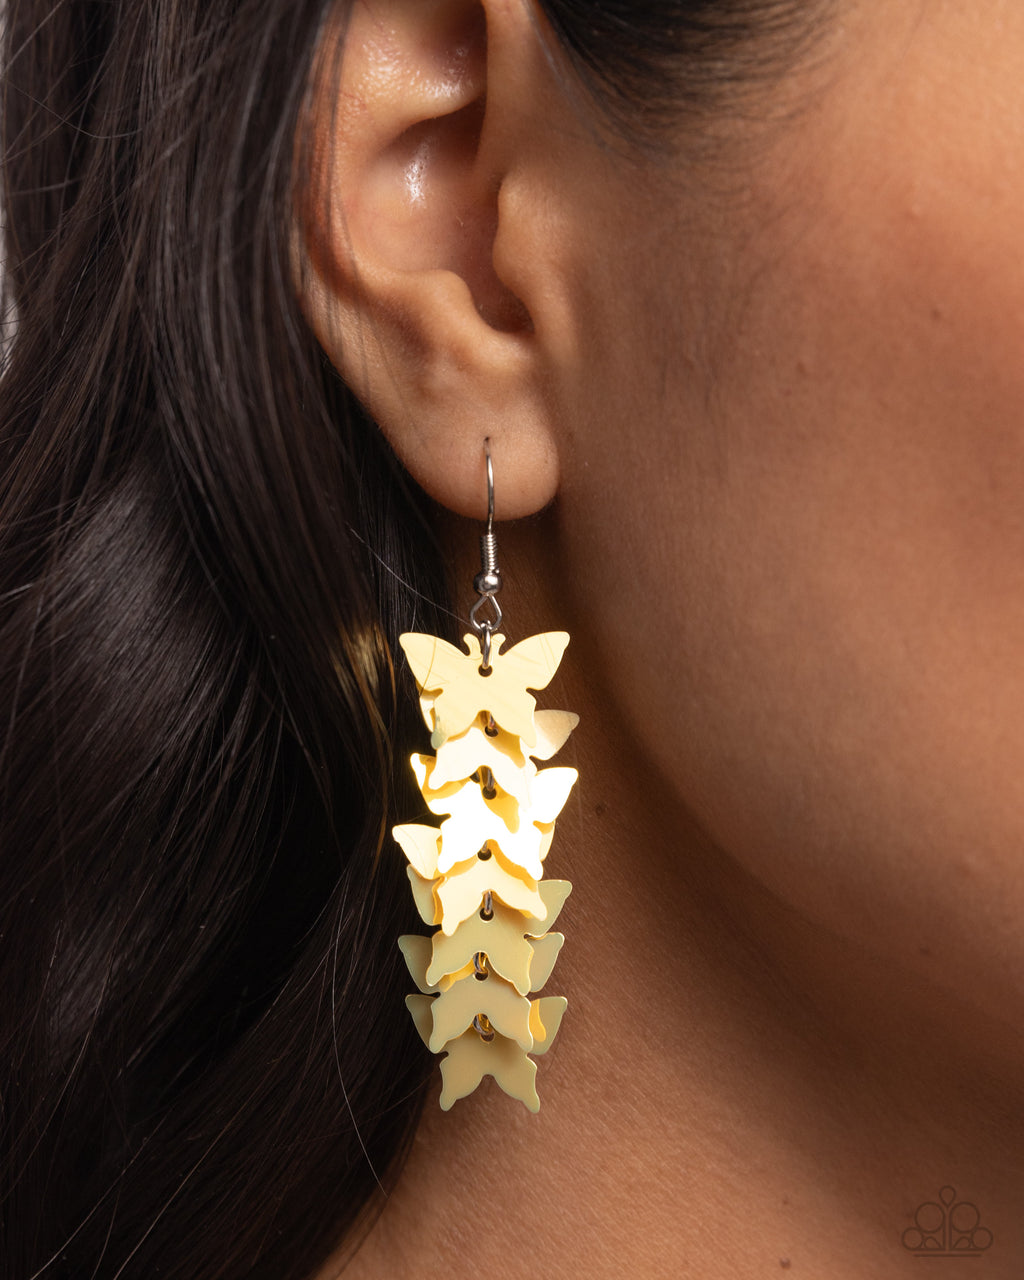 Paparazzi Aerial Ambiance - Yellow Earrings